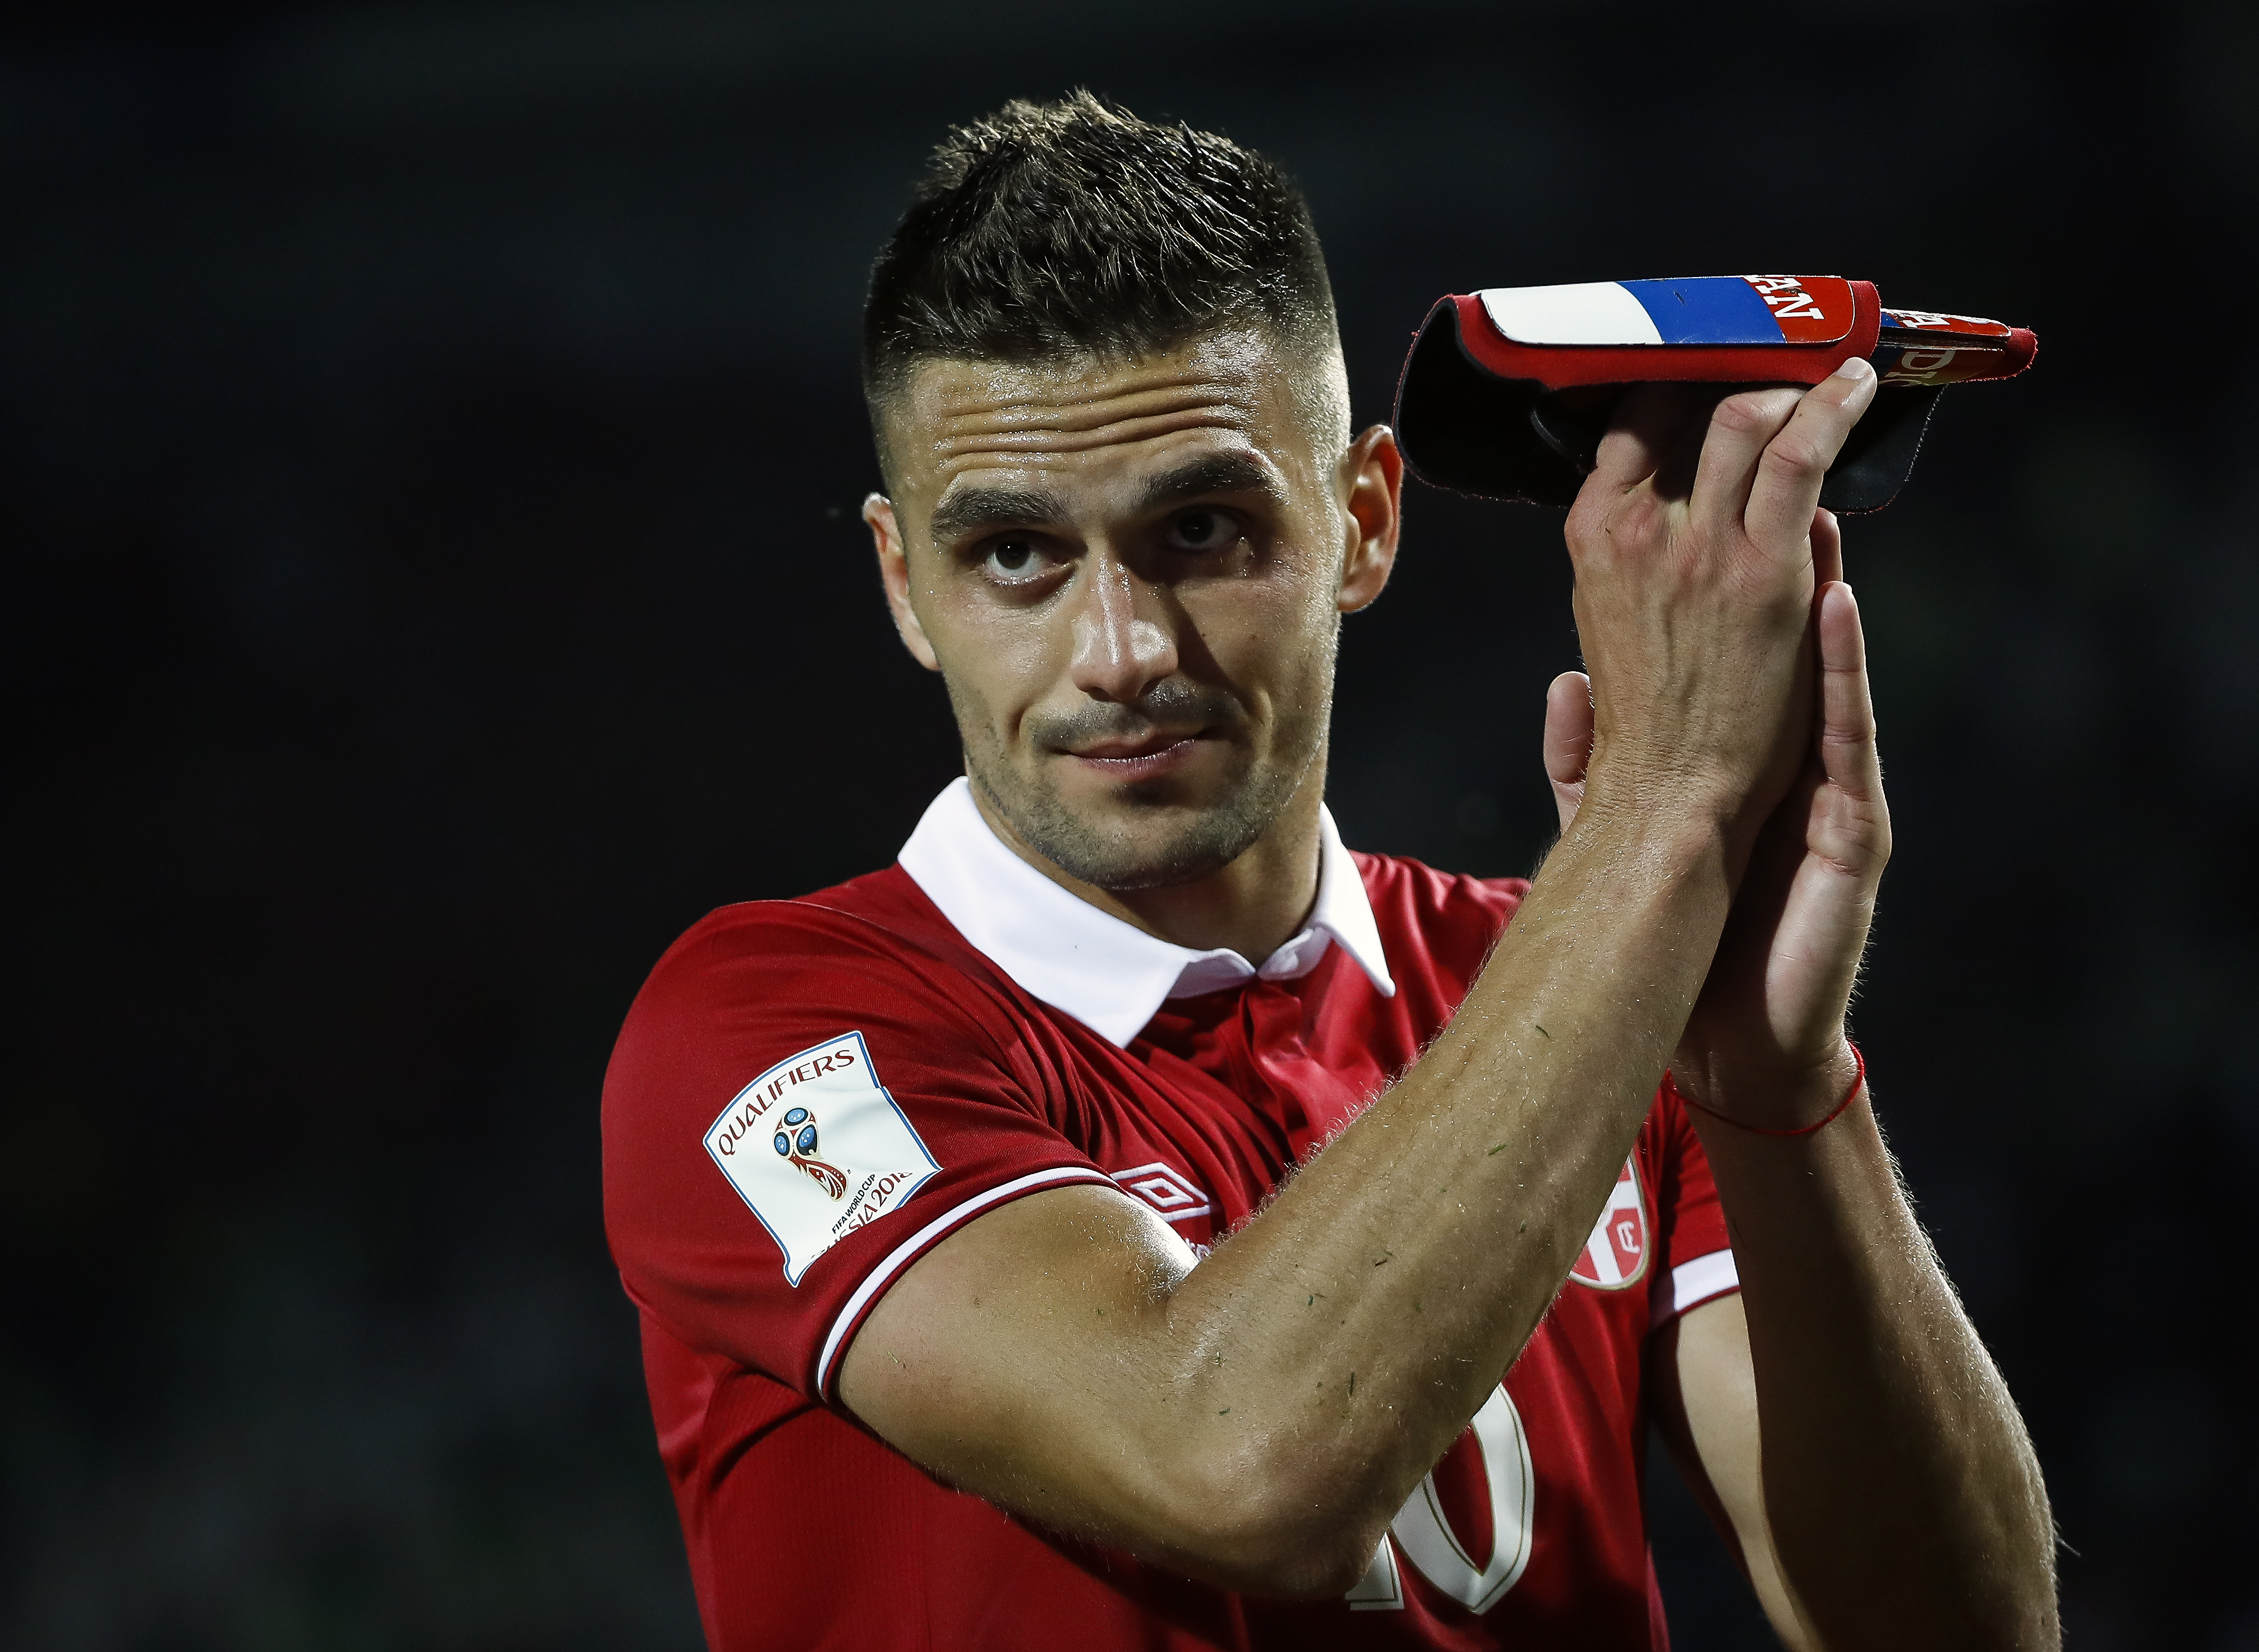 BELGRADE, SERBIA - JUNE 11: Dusan Tadic of Serbia reacts after the FIFA 2018 World Cup Qualifier between Serbia and Wales at stadium Rajko Mitic  on June 11, 2017 in Belgrade, Serbia. (Photo by Srdjan Stevanovic/Getty Images)